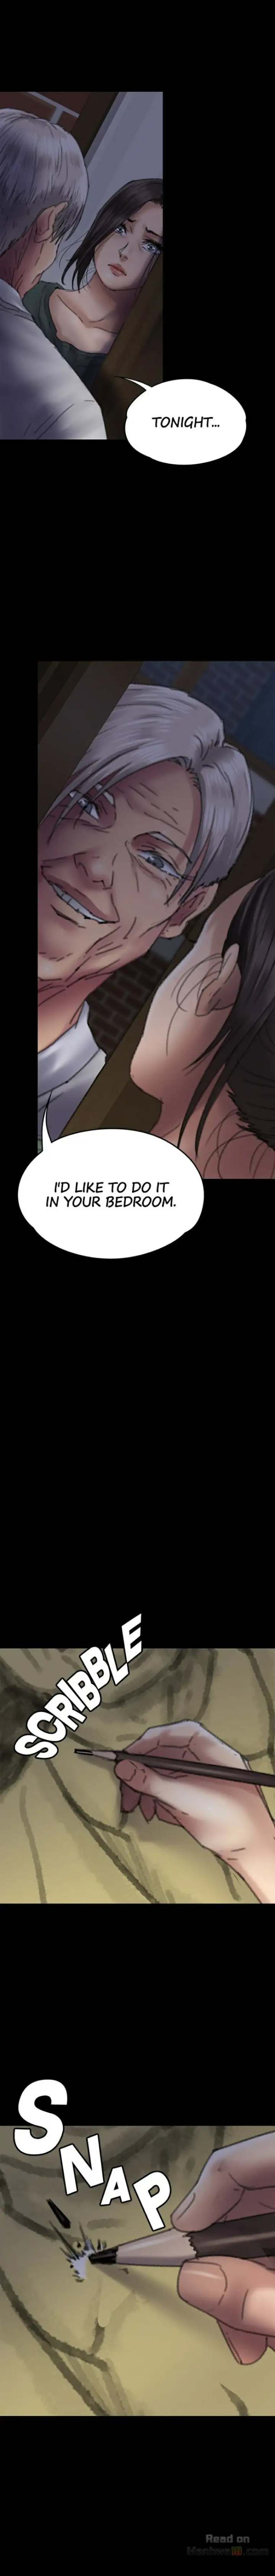 Panel Image 1 for chapter 59 of manhwa Queen Bee on read.oppai.stream